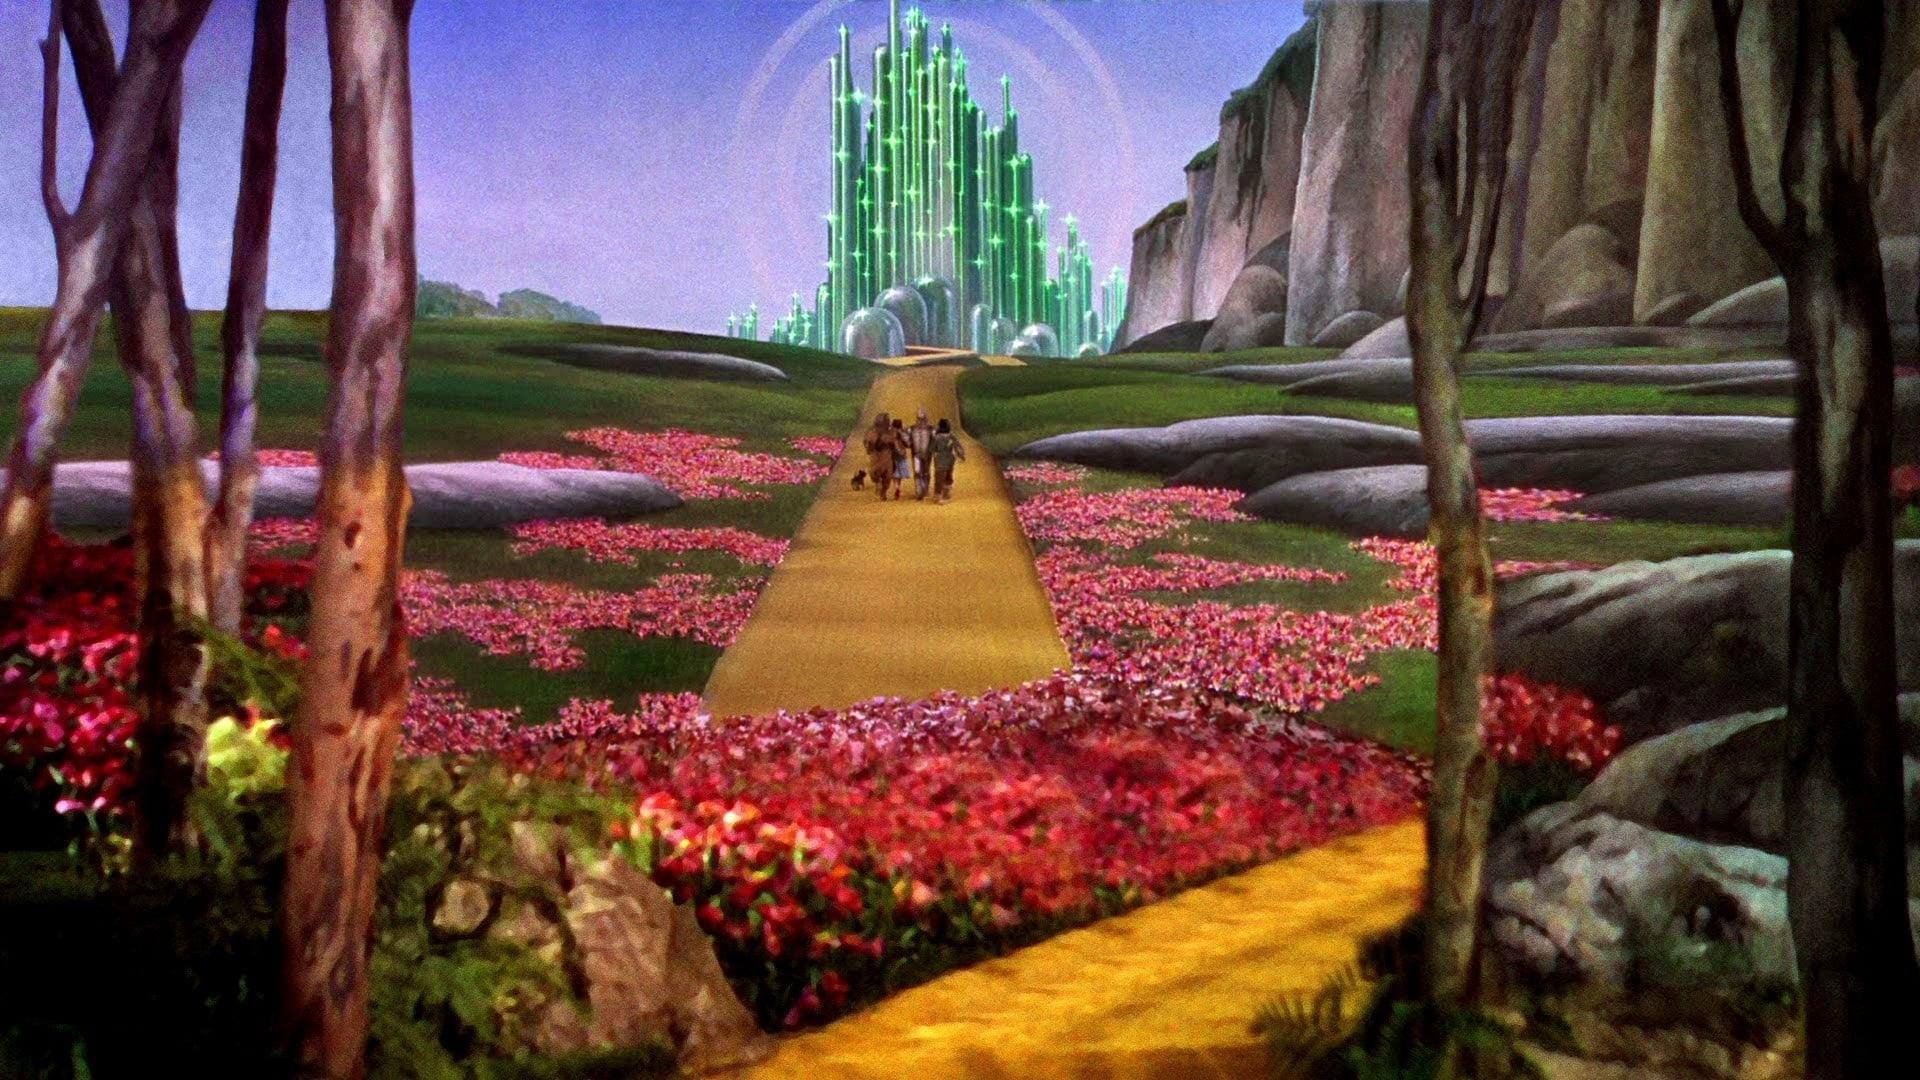 The Wizard of Oz backdrop